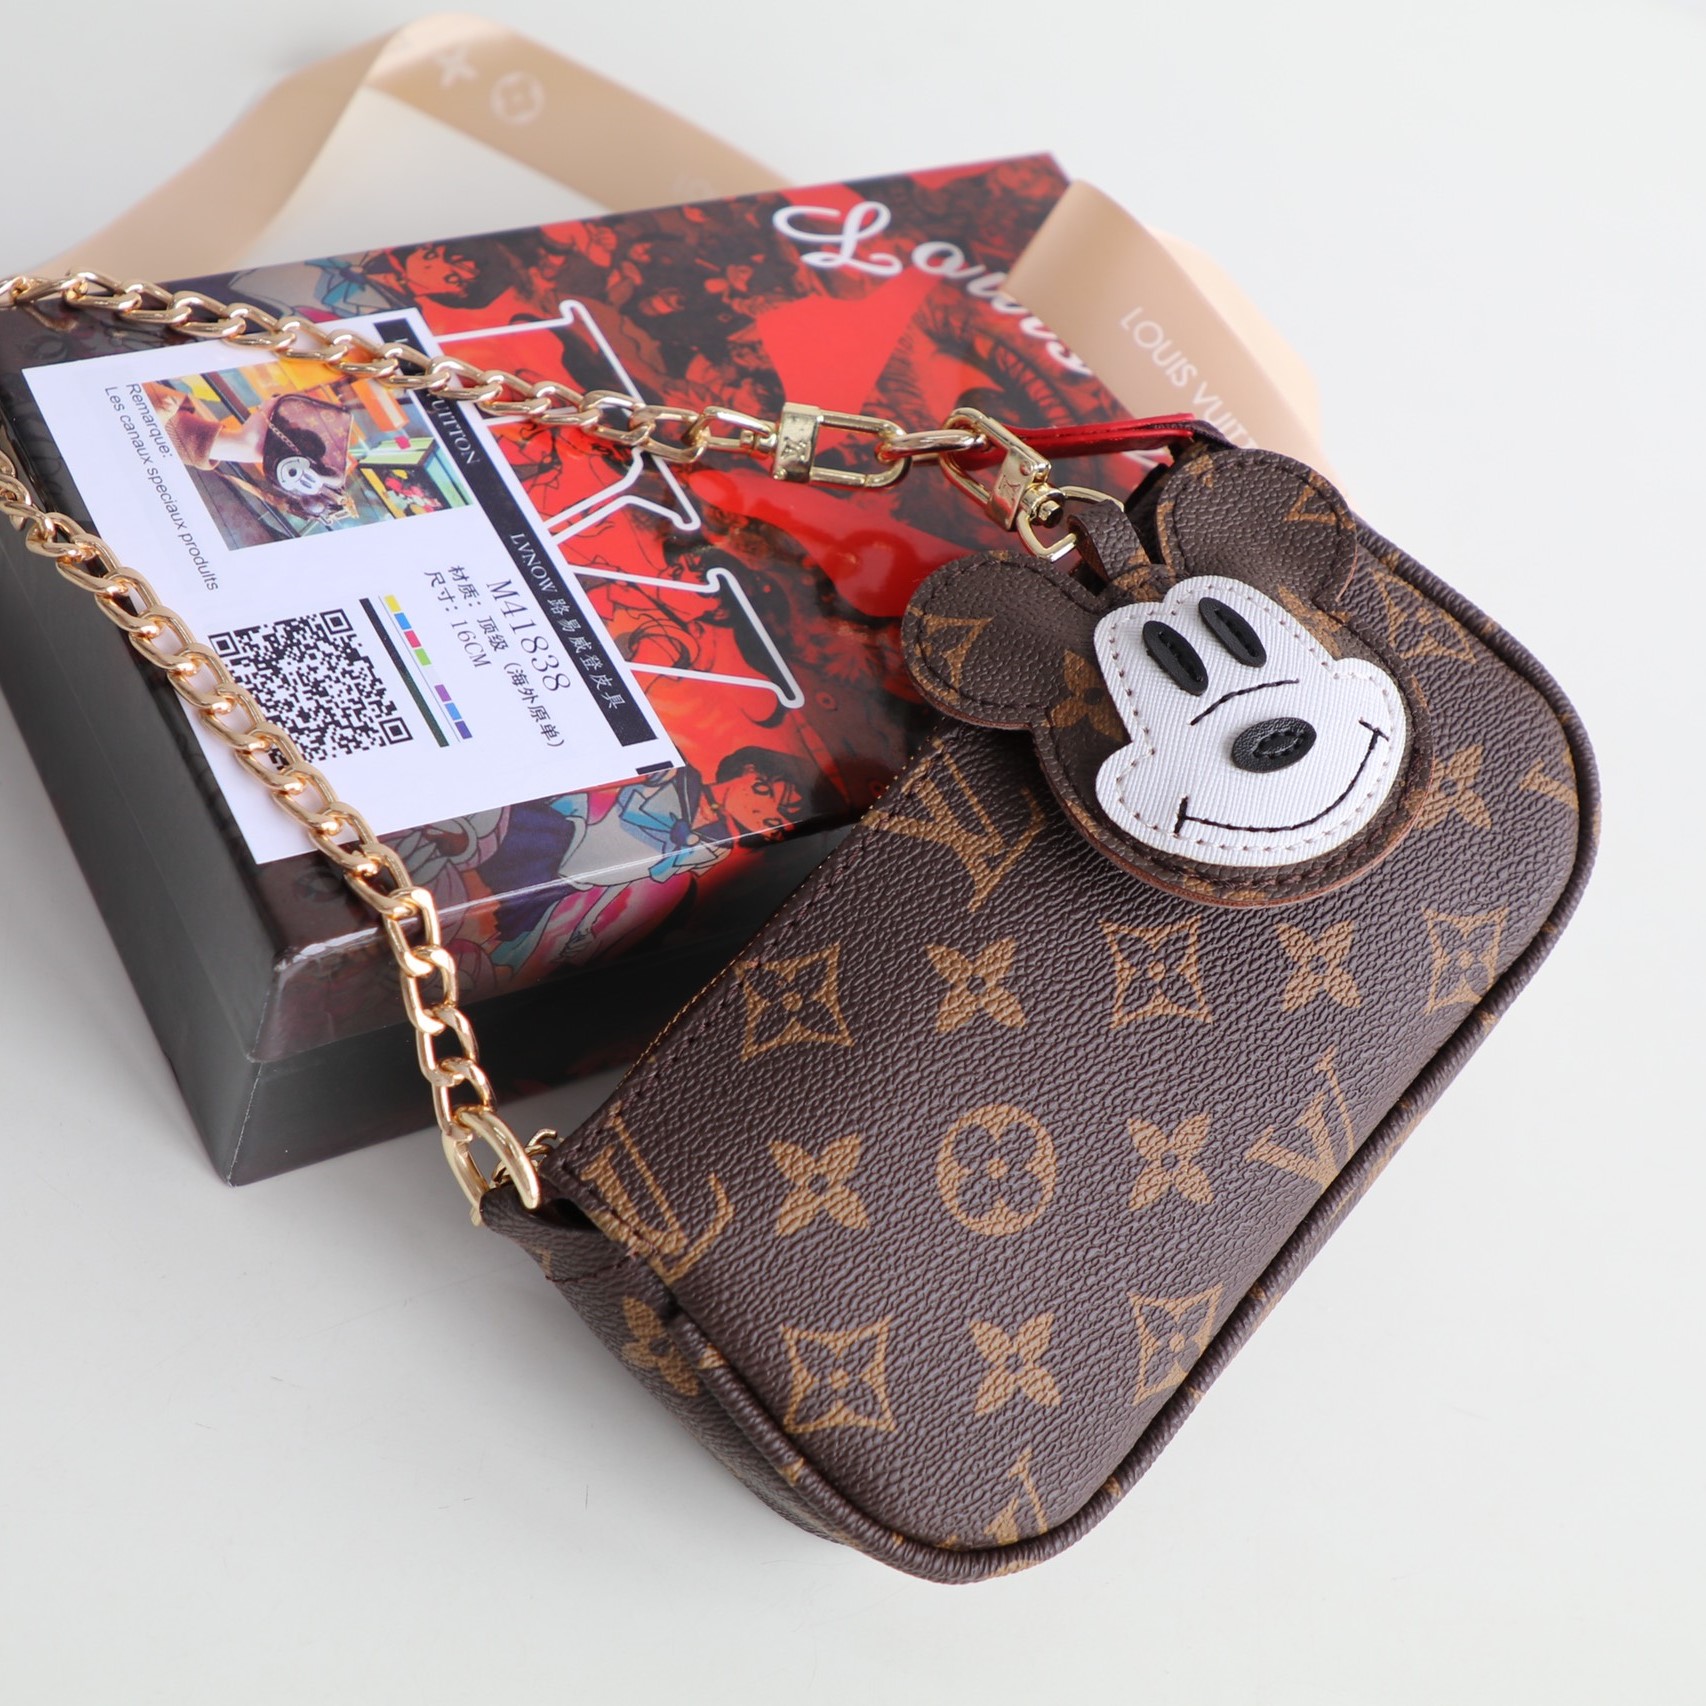  LOUIS VUITTON BAG  With Box and  B  W Online Store  Facebook